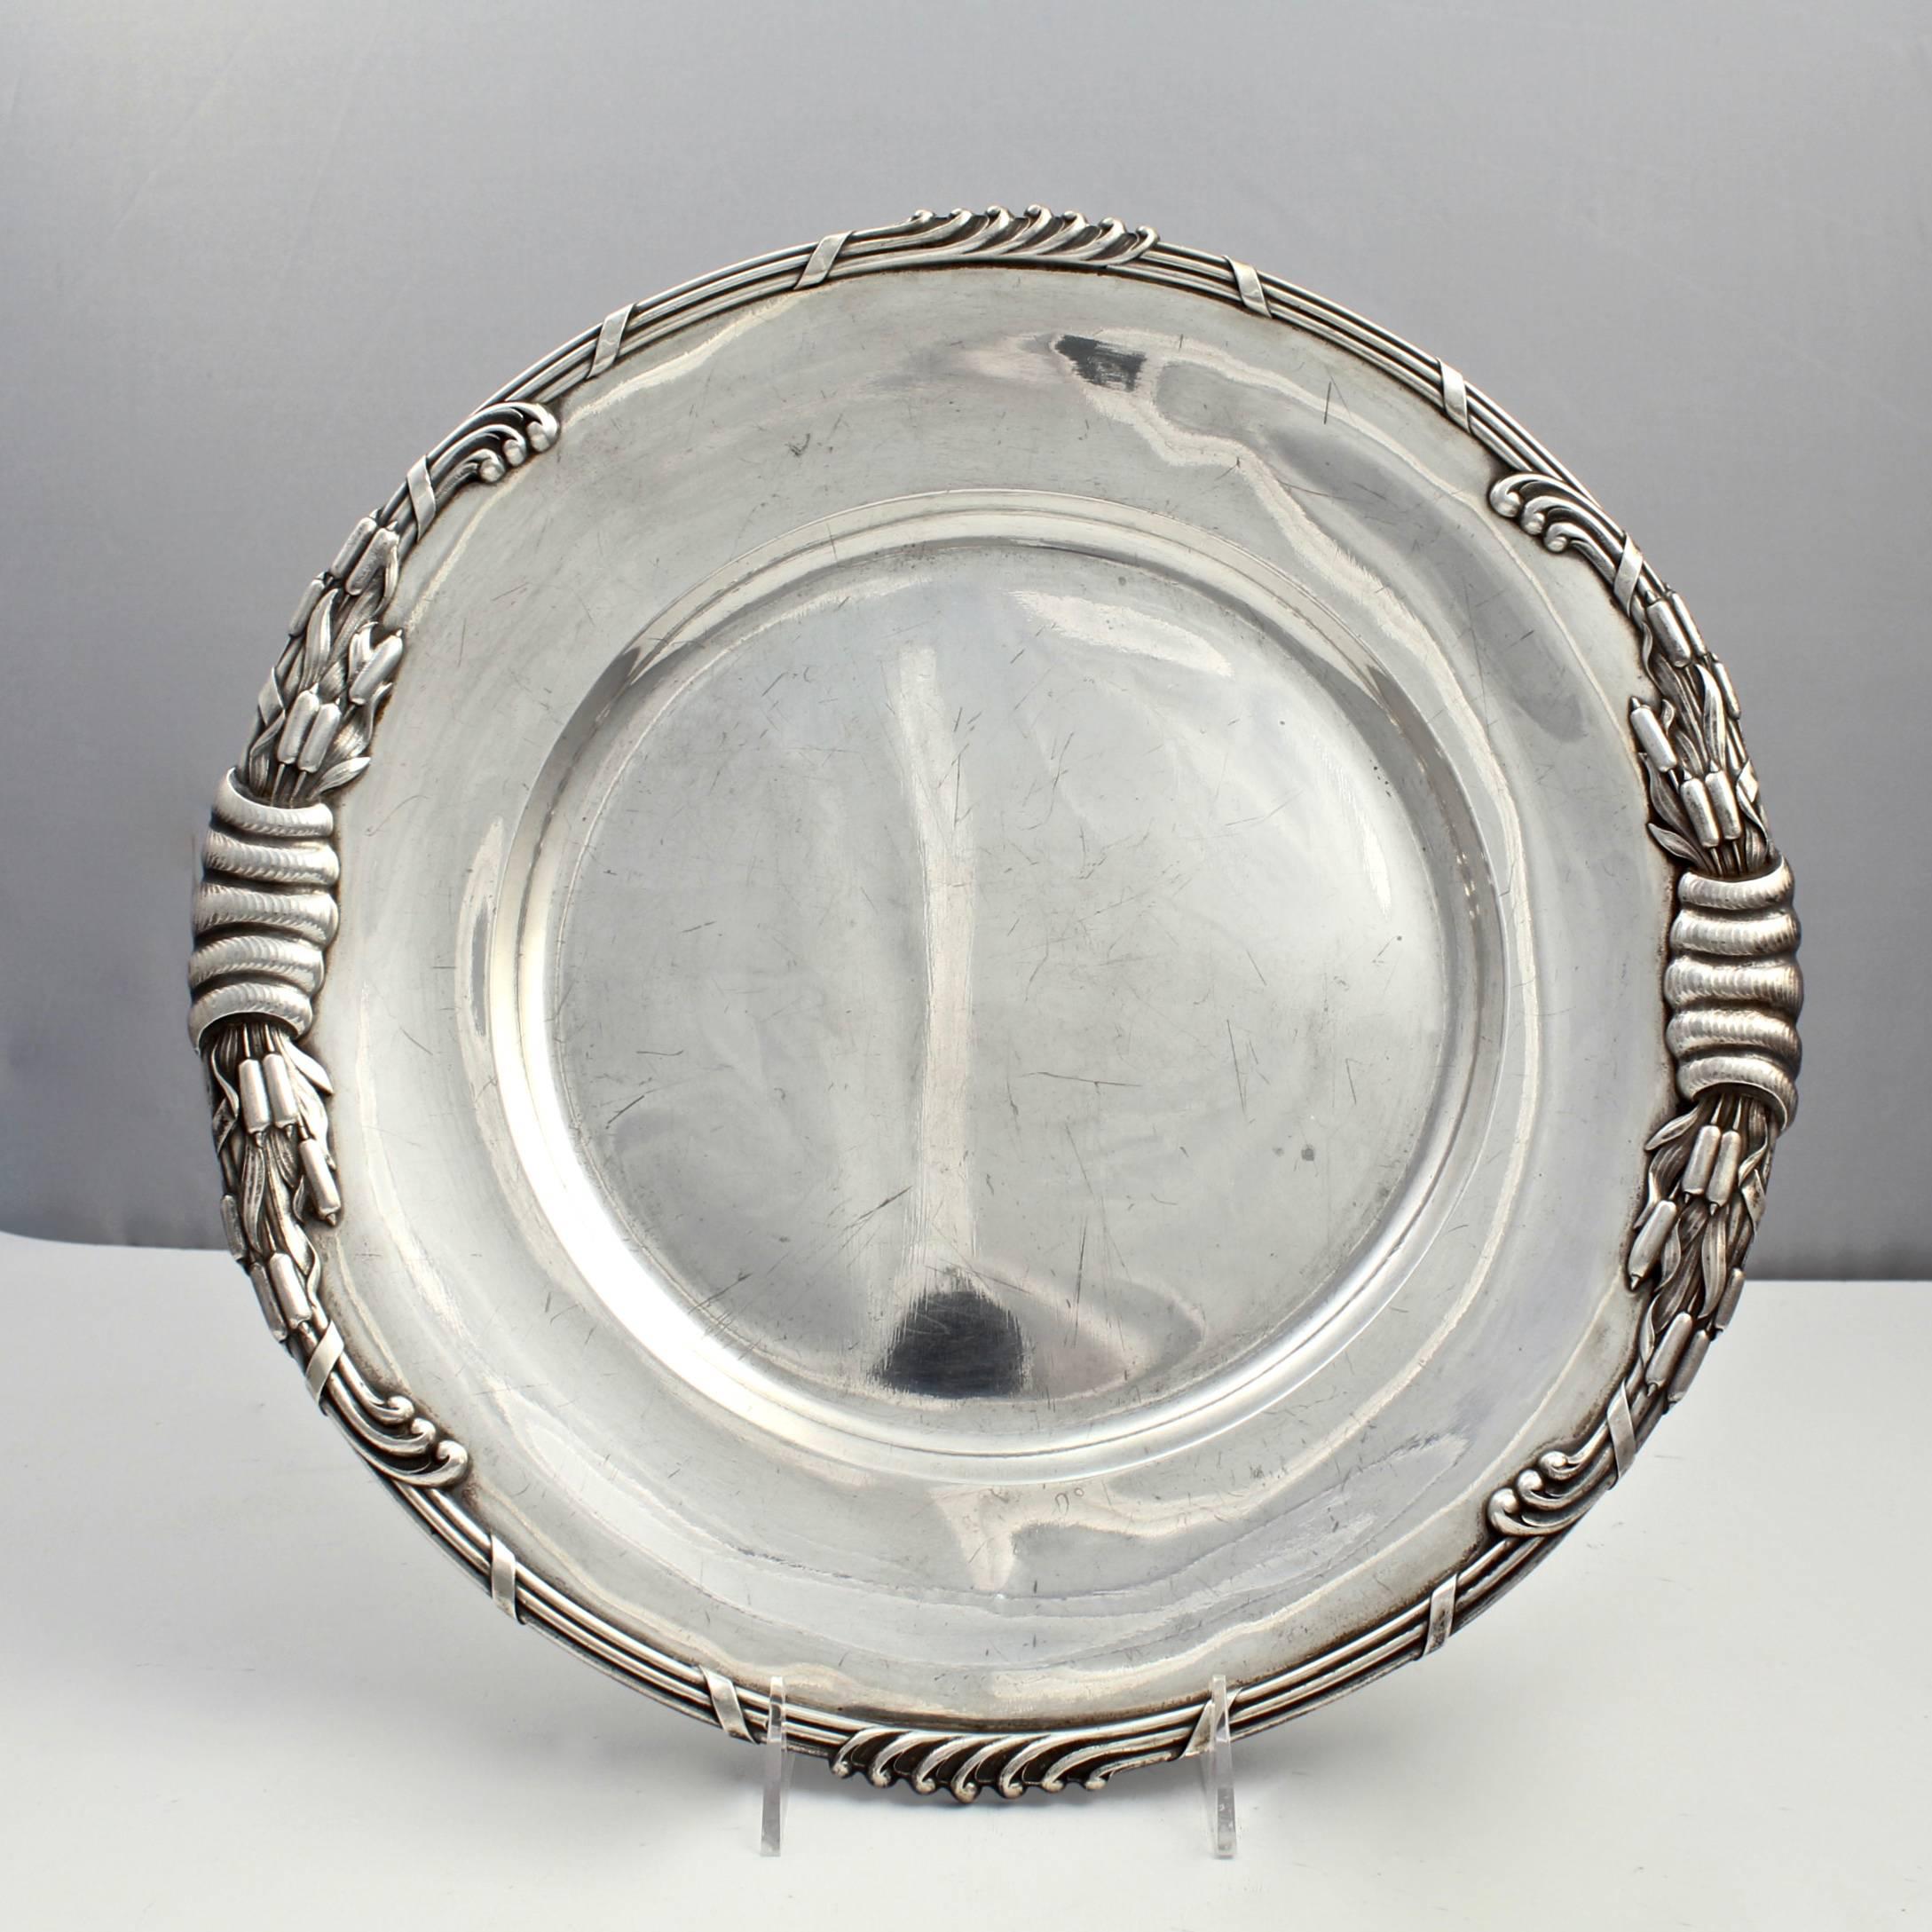 An incredibly heavy pair of period Art Nouveau Dutch sterling silver round serving trays from a large service by Ph. Saakes of the Hague. 

These pieces are likely from a commissioned service. Saakes was a Dutch gold and silversmith in the late